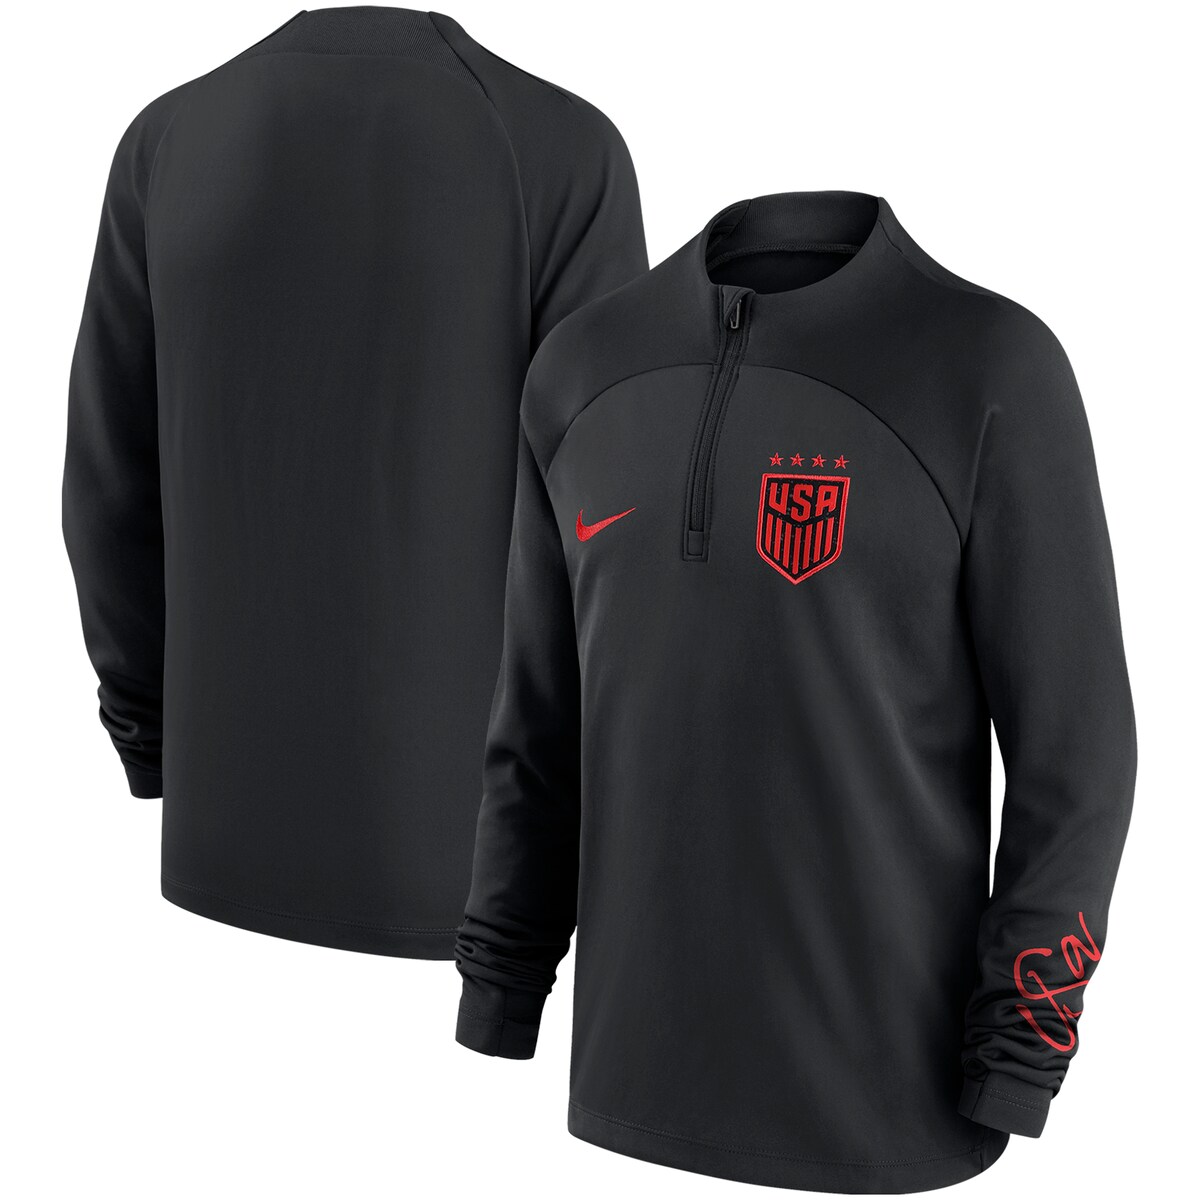 Elevate your kiddo's club spirit with a bonafide look by grabbing this USMNT 2023 Academy Pro Drill top. Crafted by Nike, it features sleek raglan sleeves for a natural range of motion and a sleek quarter-zip closure. The undeniable USMNT crest leaves no doubt who they root for on match day, while the integrated Nike Dri-FIT fabric technology helps to wick away and keep your youngster cool through every scrimmage, strike and save.1/4-ZipLong sleeveEmbroidered fabric appliqueMaterial: 100% PolyesterMachine wash, tumble dry lowZipper garageHeat-sealed graphicsDri-FIT technology wicks away moistureThumbholes in cuffsMove To Zero is Nike's journey toward zero carbon and zero waste to help protect the future of sport. Apparel labeled sustainable materials is made with at least 55% recycled content.Officially licensedTapered collarRaglan sleevesLightweight jacket suitable for mild temperaturesBrand: NikeImported